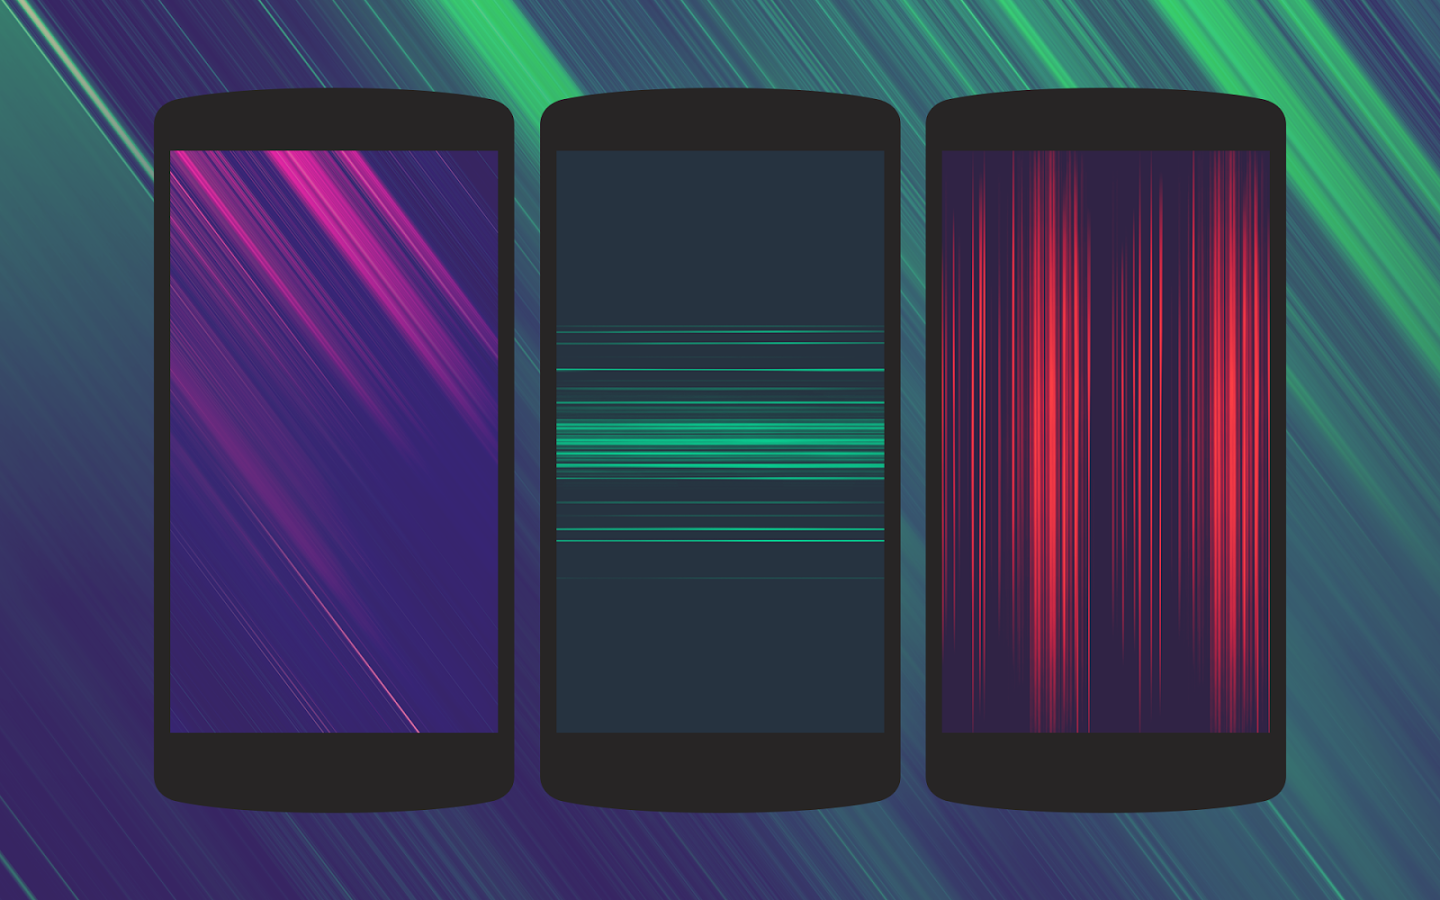 Wolz - Wallpaper Pack - Android Apps on Google Play